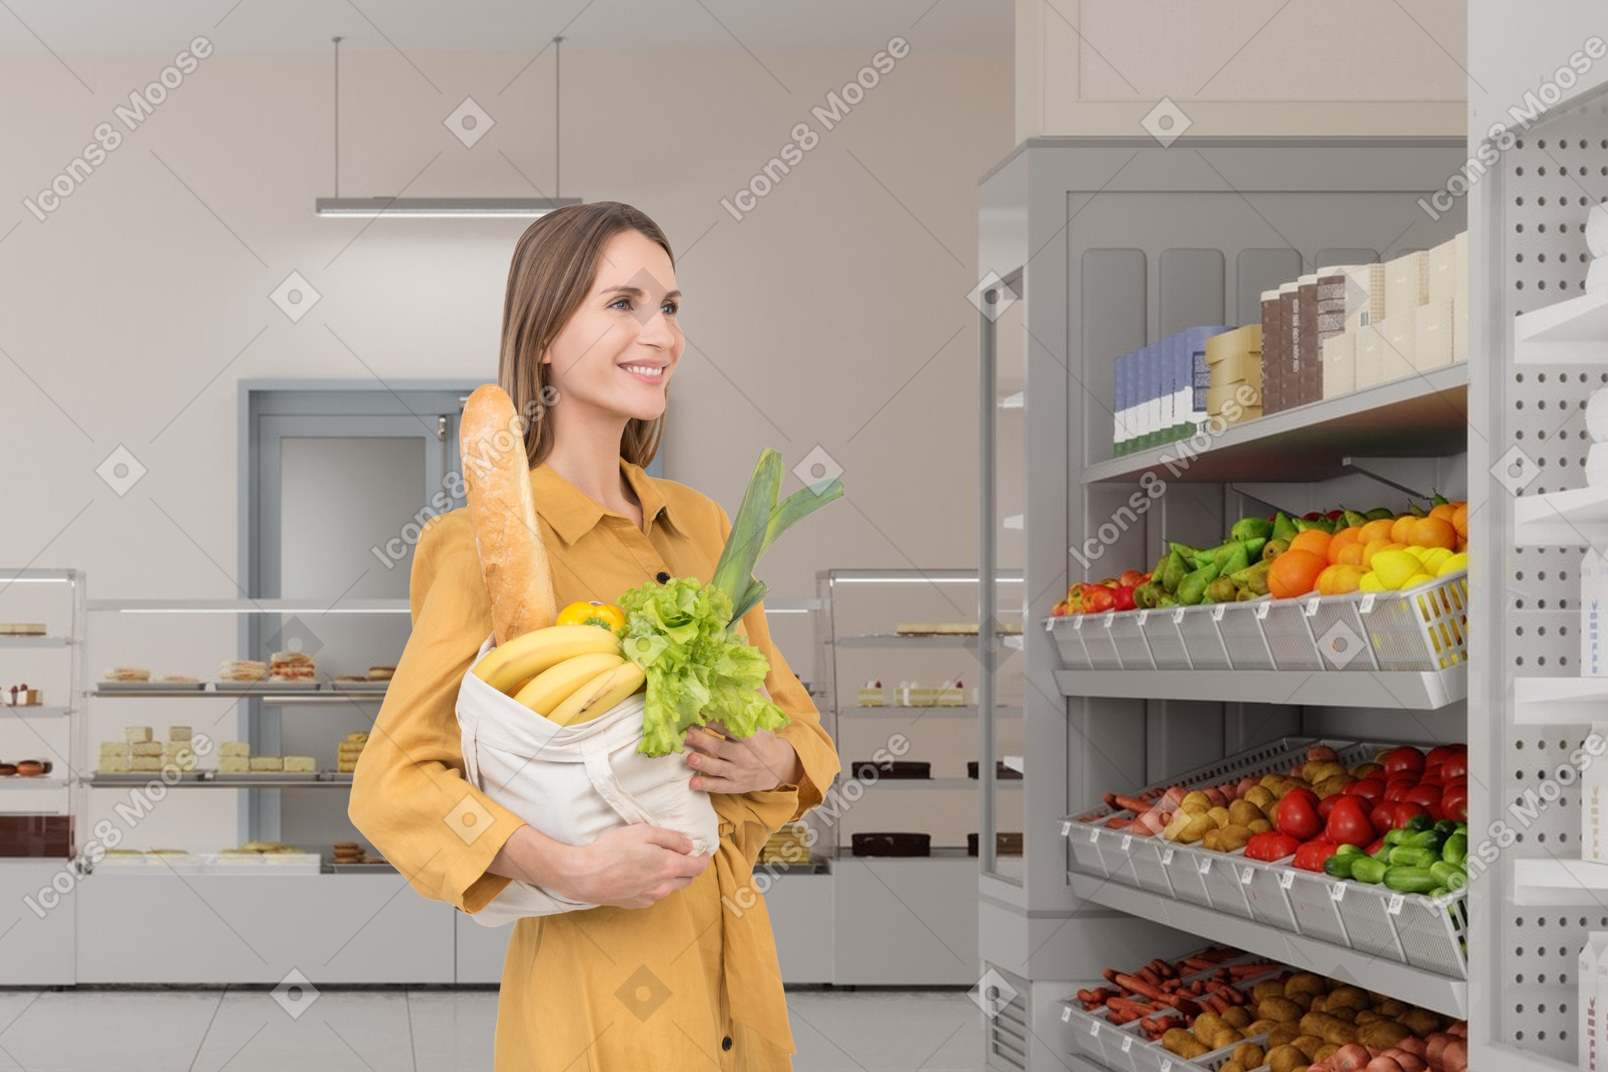 A woman holding a bag of vegetables in a grocery store